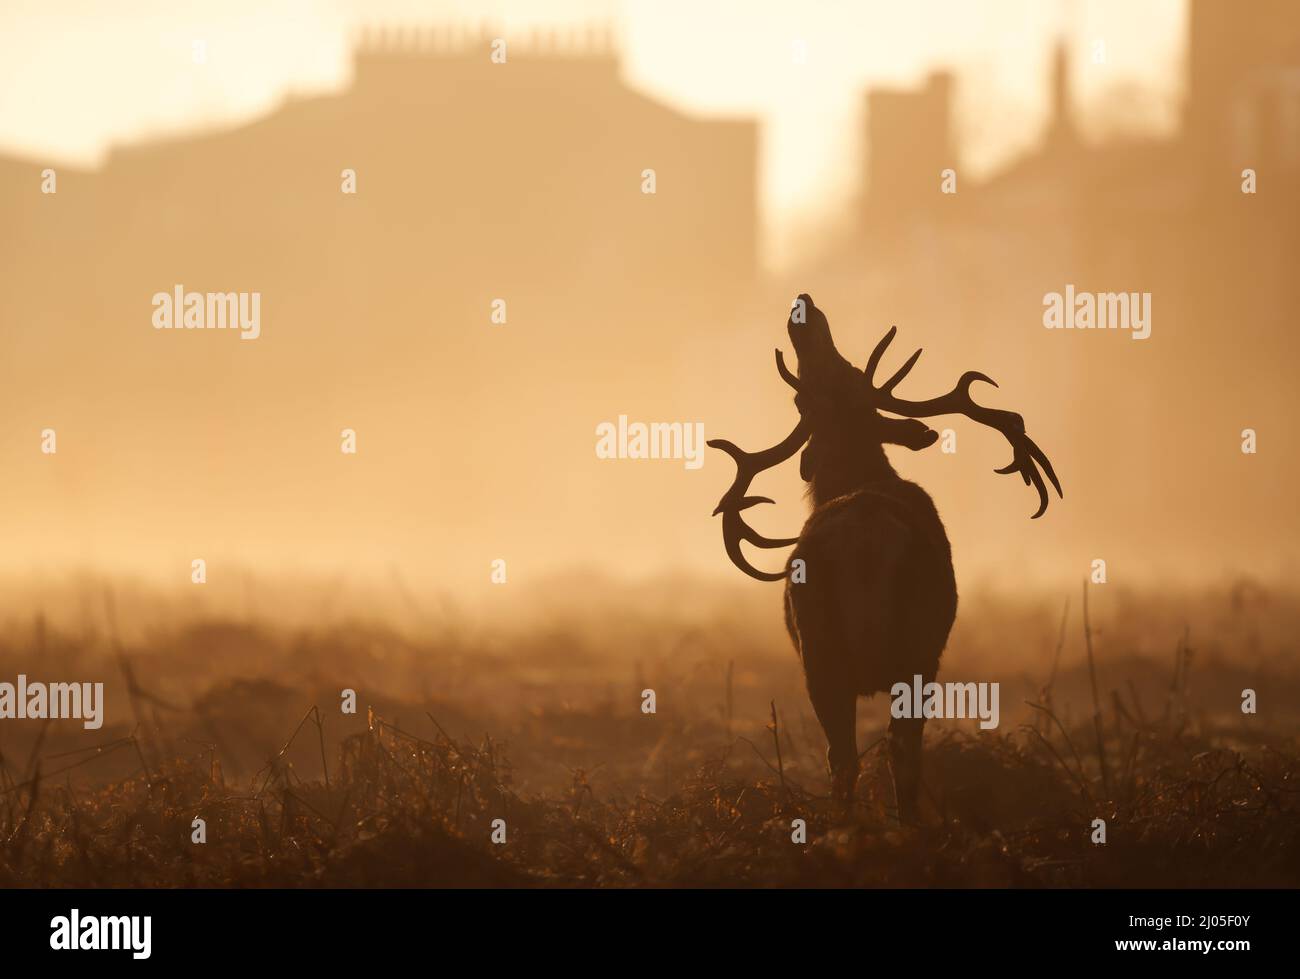 Silhouette of a red deer stag in an urban surrounding, London, UK. Stock Photo